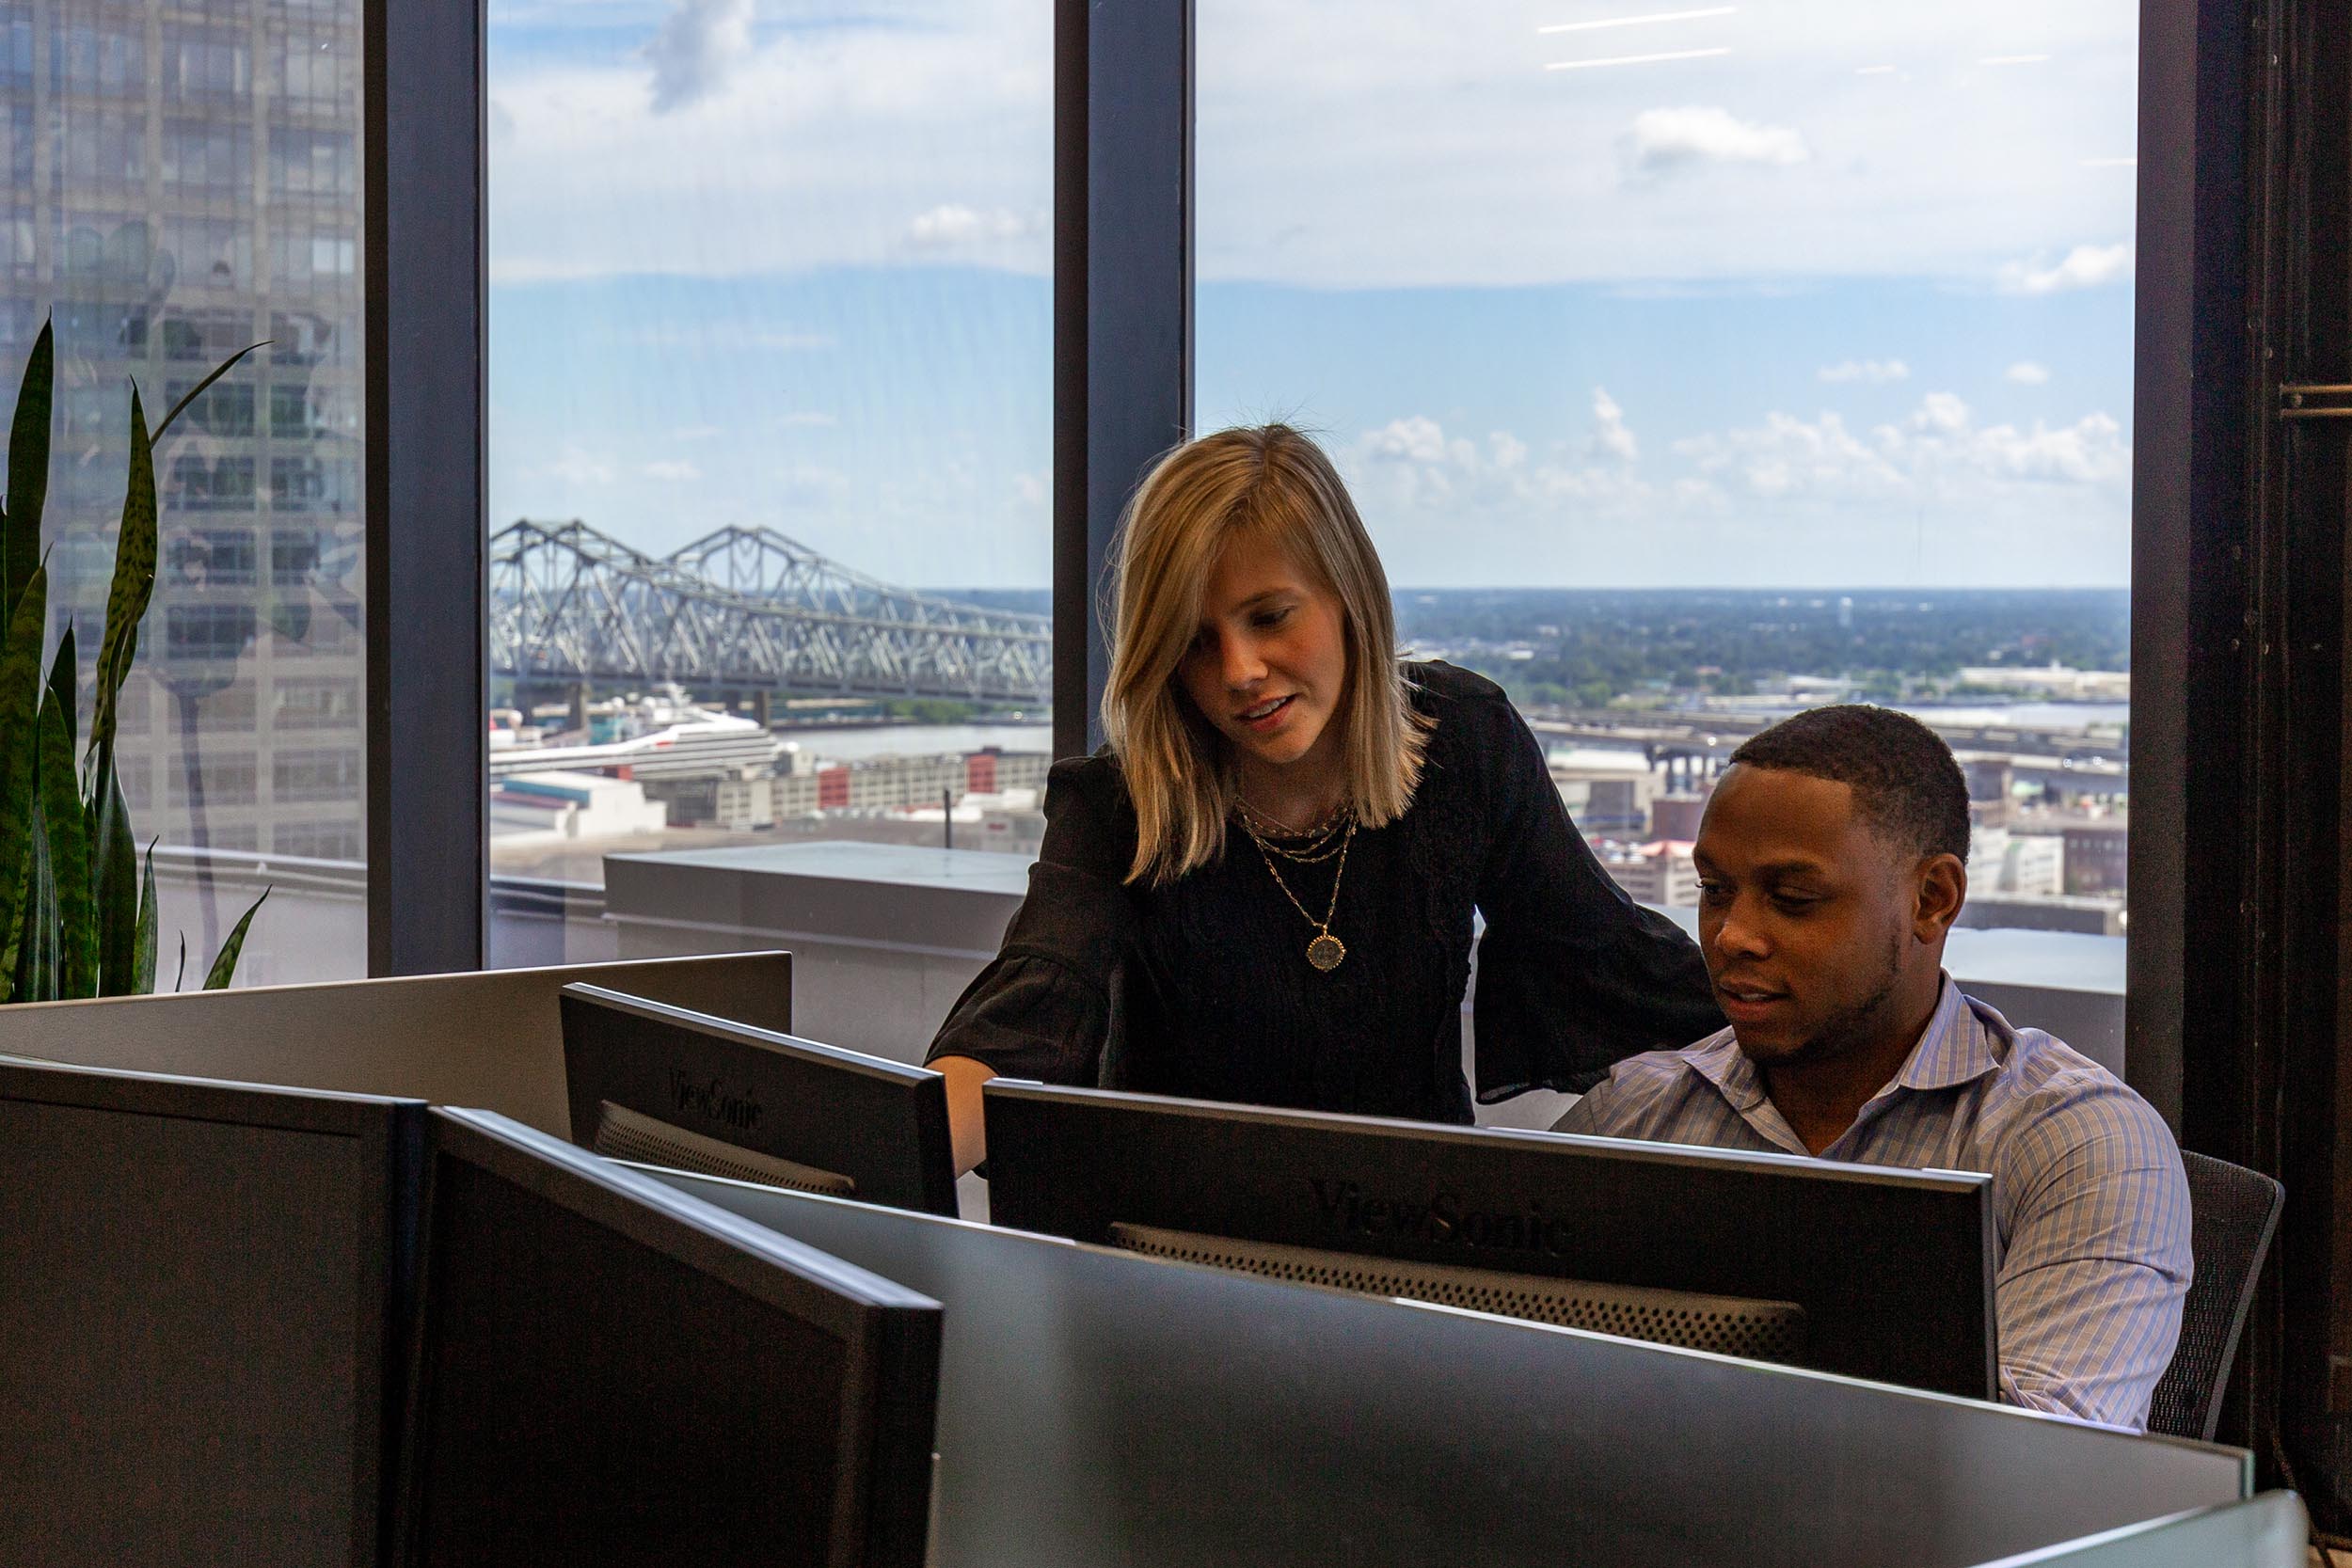 Two workers collaborate on business reports in an office overlooking downtown